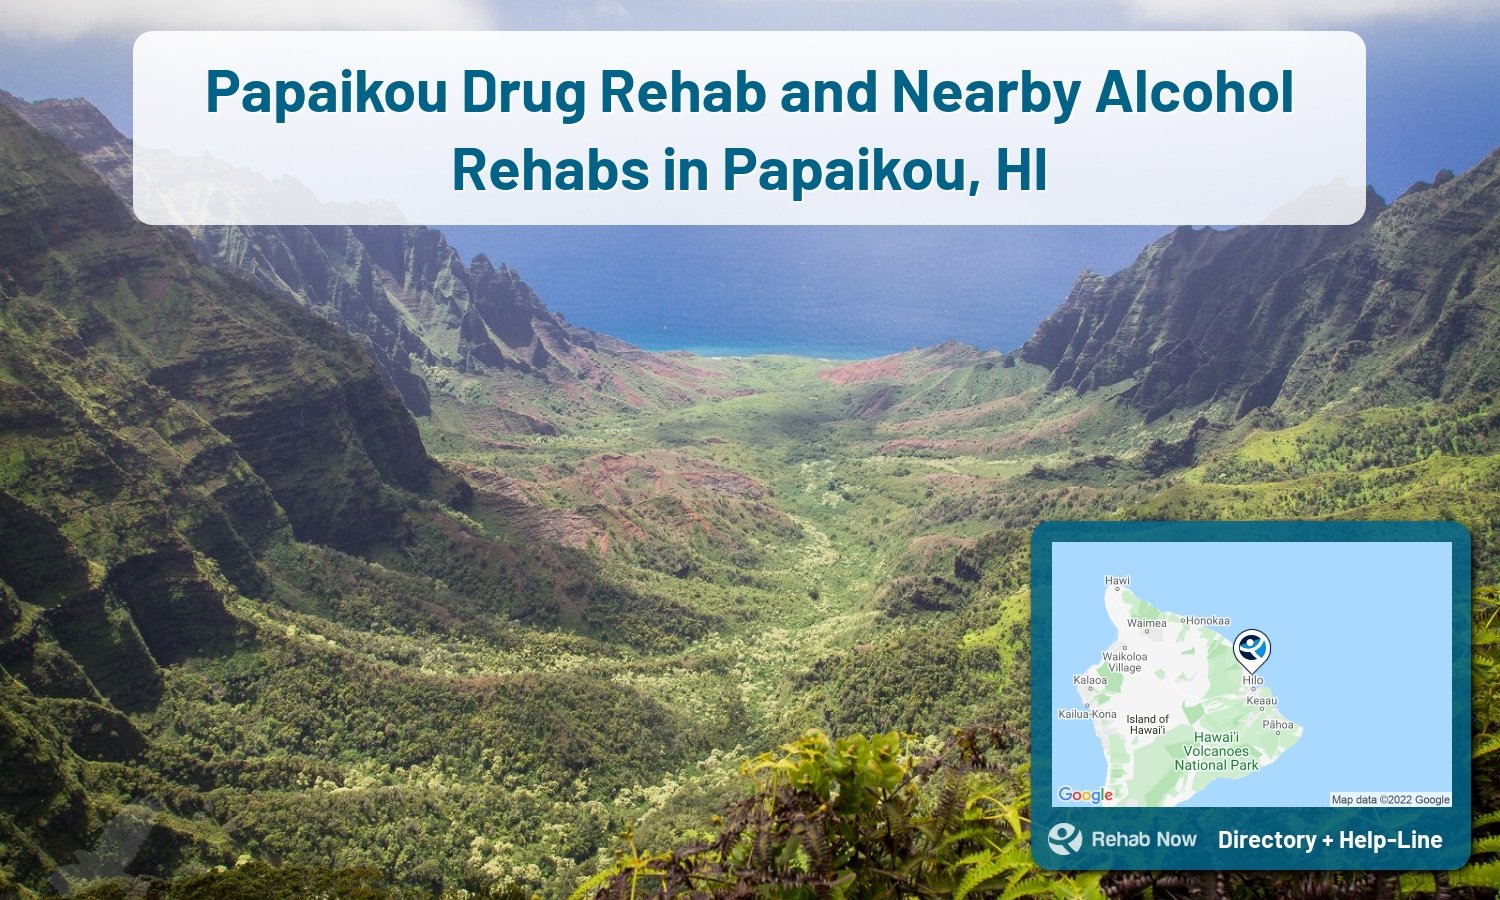 Papaikou, HI Treatment Centers. Find drug rehab in Papaikou, Hawaii, or detox and treatment programs. Get the right help now!